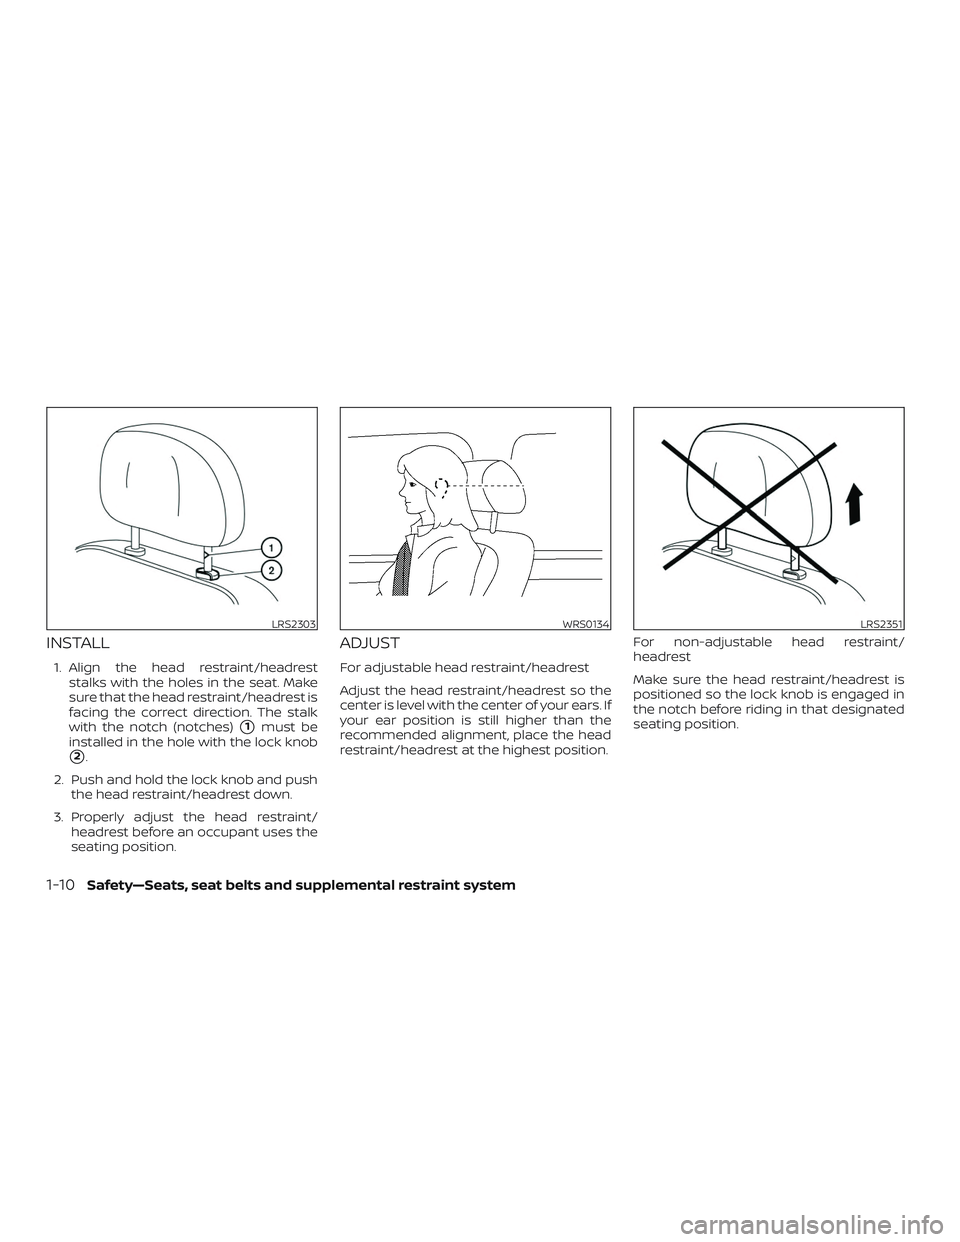 NISSAN ALTIMA 2020  Owner´s Manual INSTALL
1. Align the head restraint/headreststalks with the holes in the seat. Make
sure that the head restraint/headrest is
facing the correct direction. The stalk
with the notch (notches)
1must be
